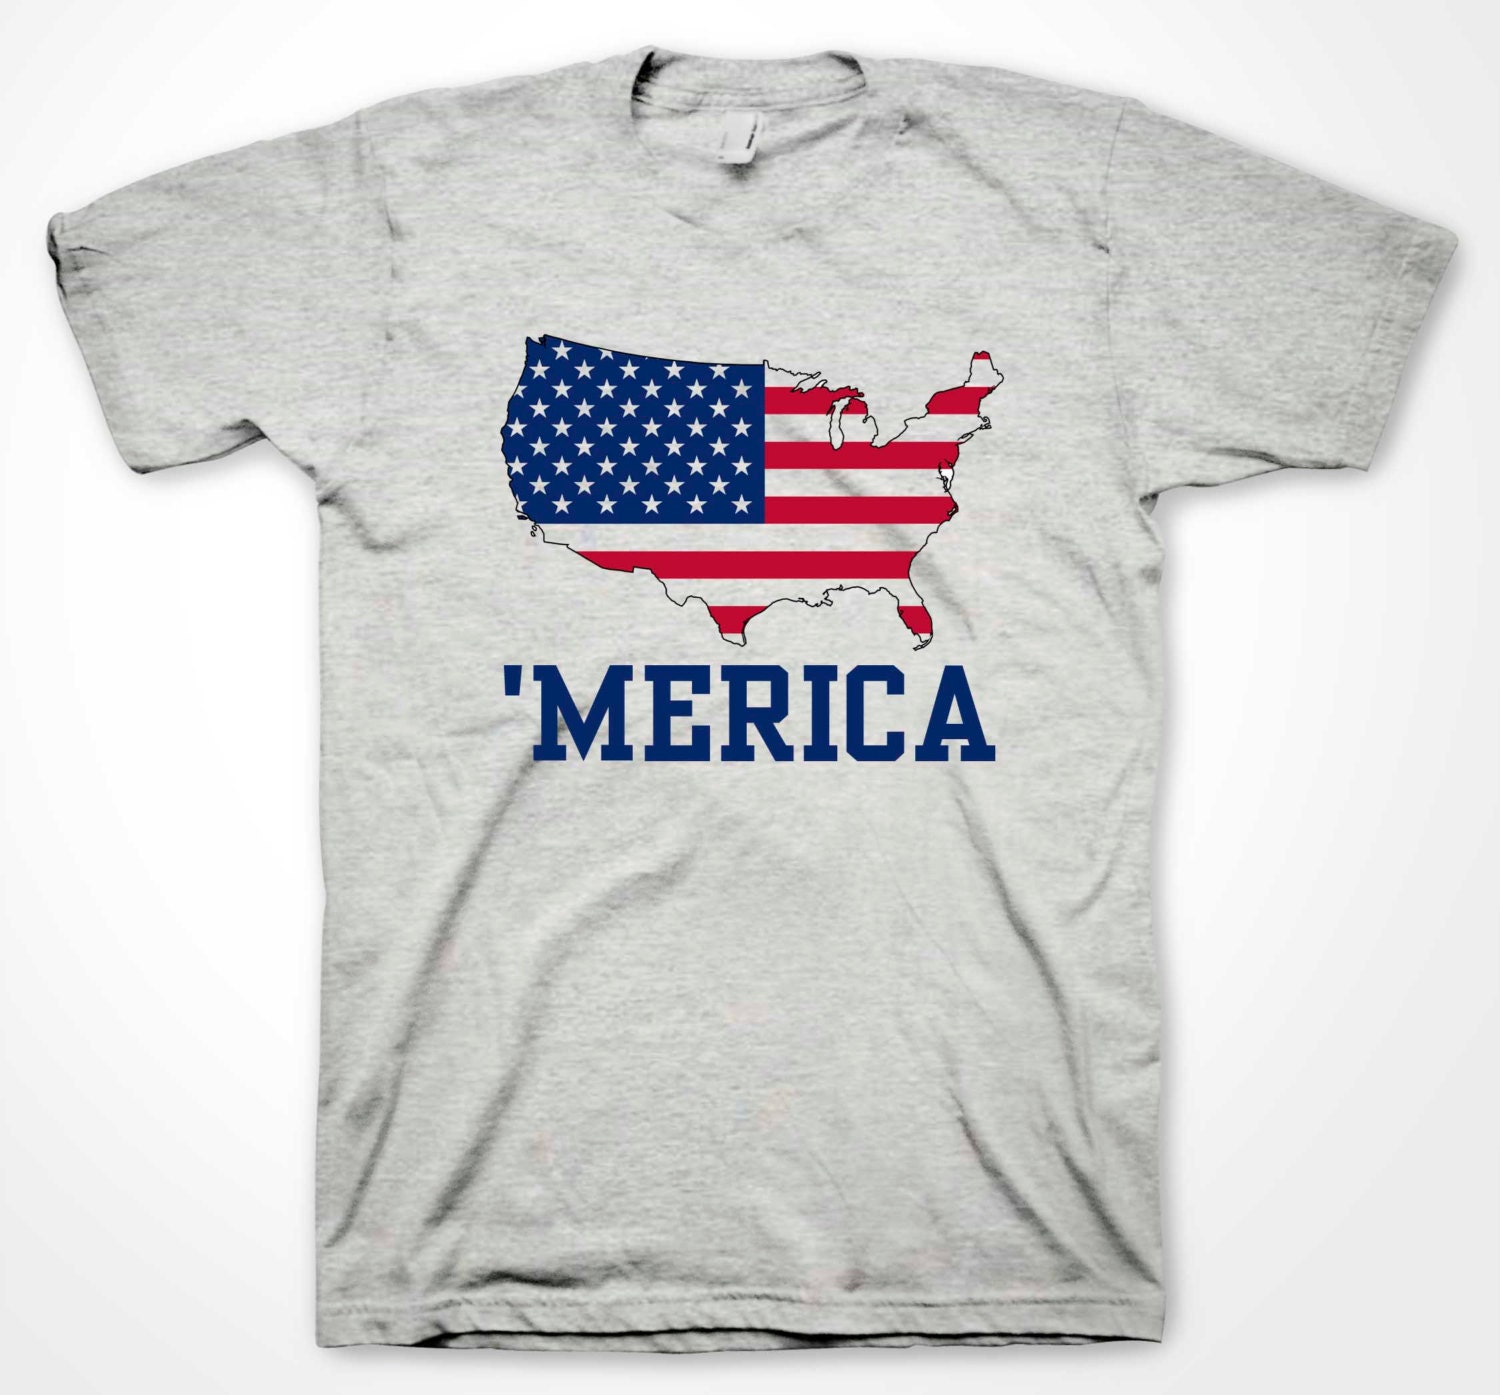 MERICA T-shirt America USA Flag map Independence Day July 4th